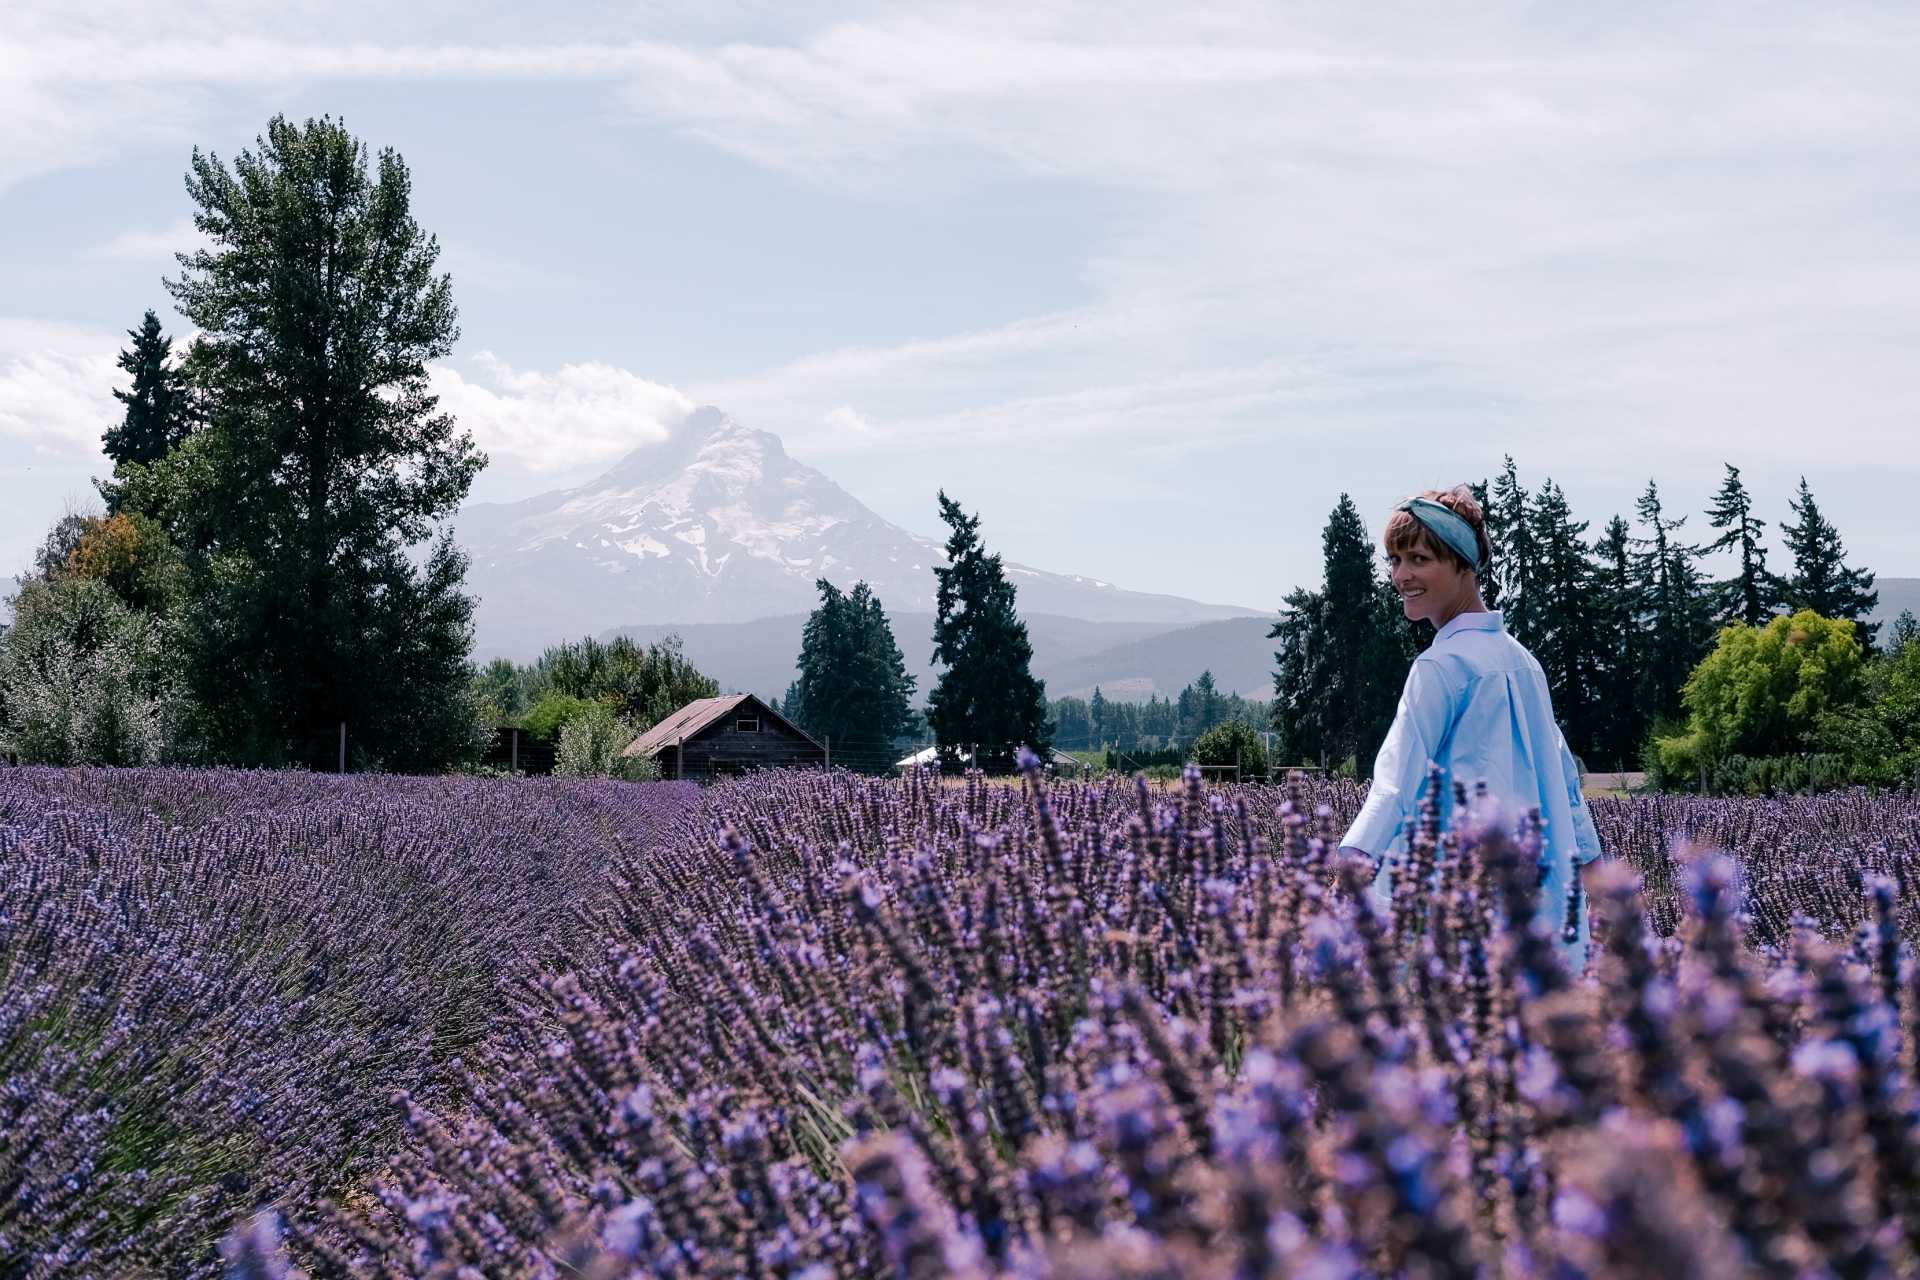 A local's guide to flower fields & festivals in Oregon